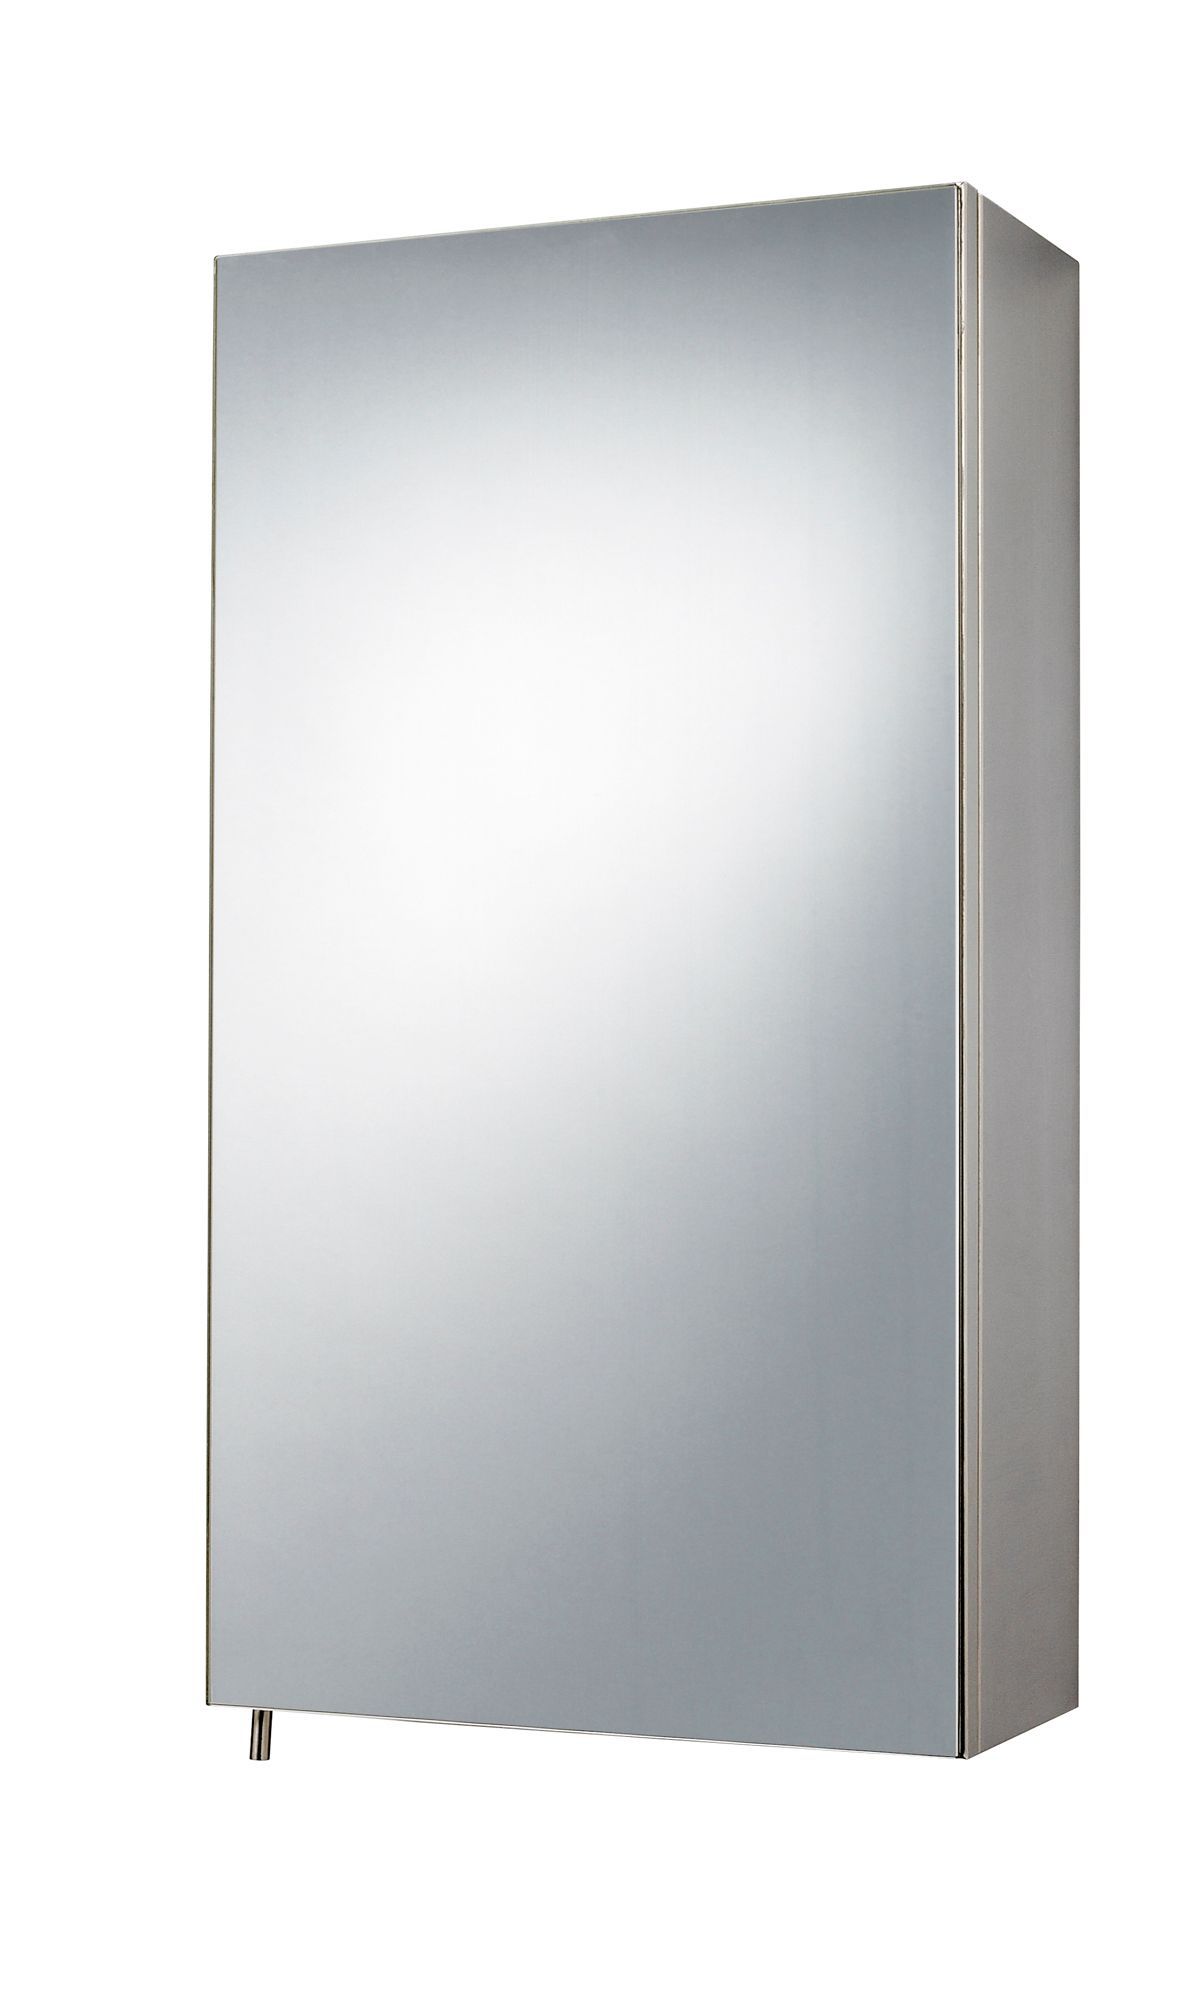 Fonteno Silver effect Single Cabinet with Mirrored door (H)550mm (W)300mm